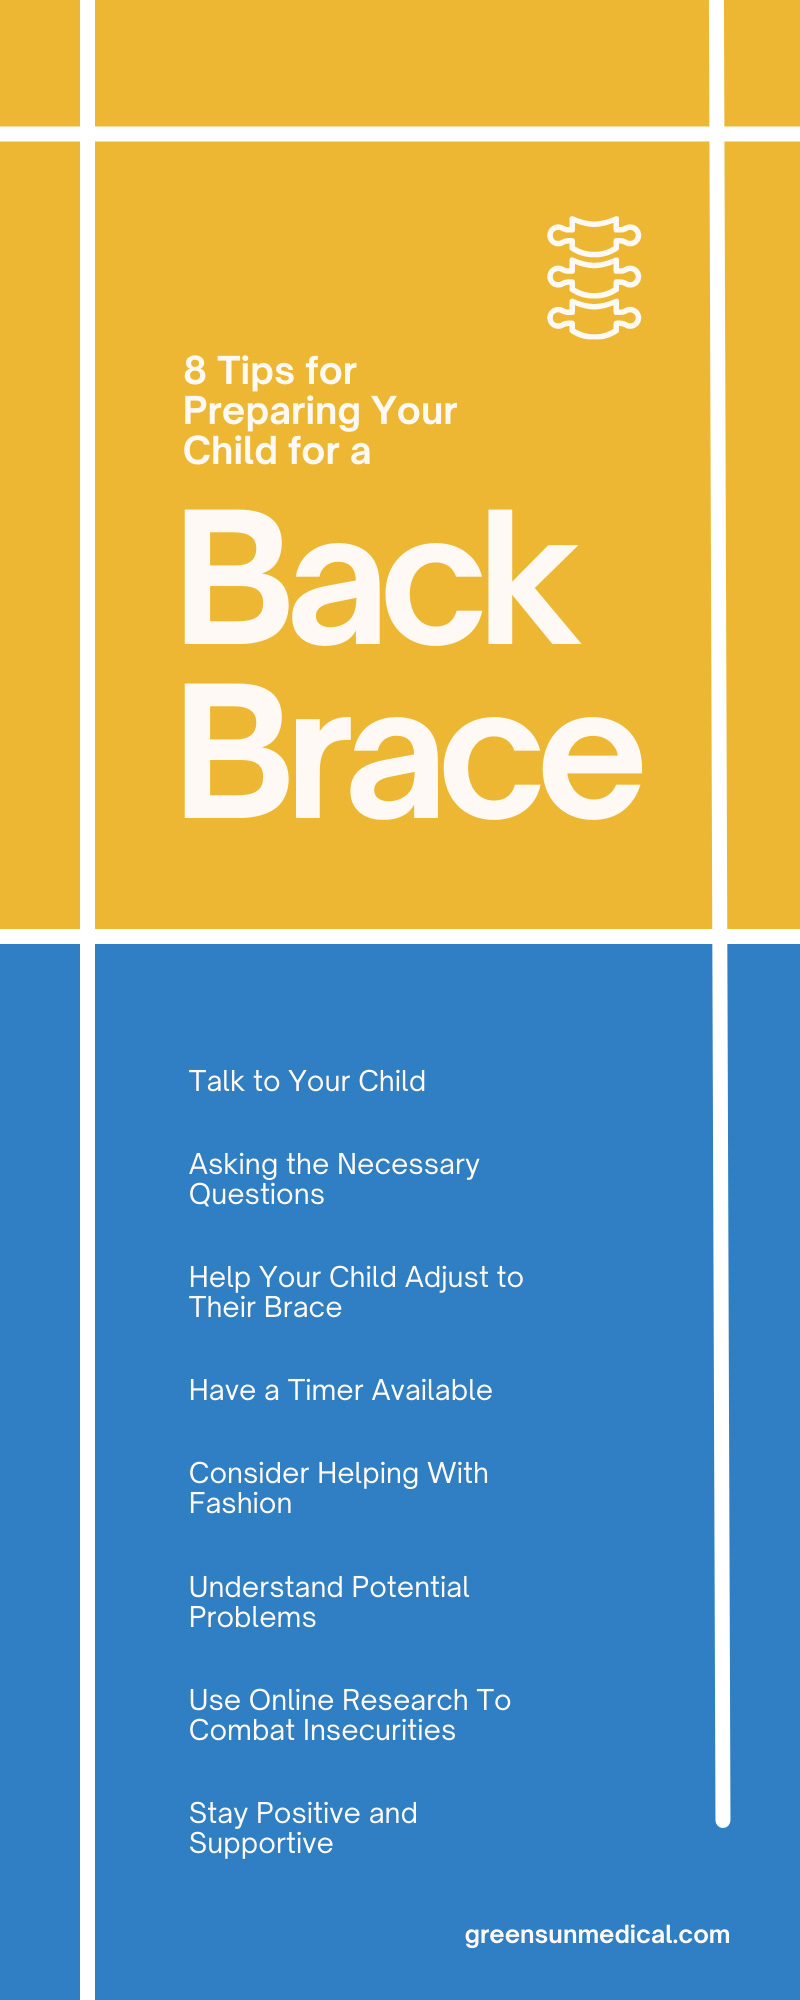 8 Tips for Preparing Your Child for a Back Brace